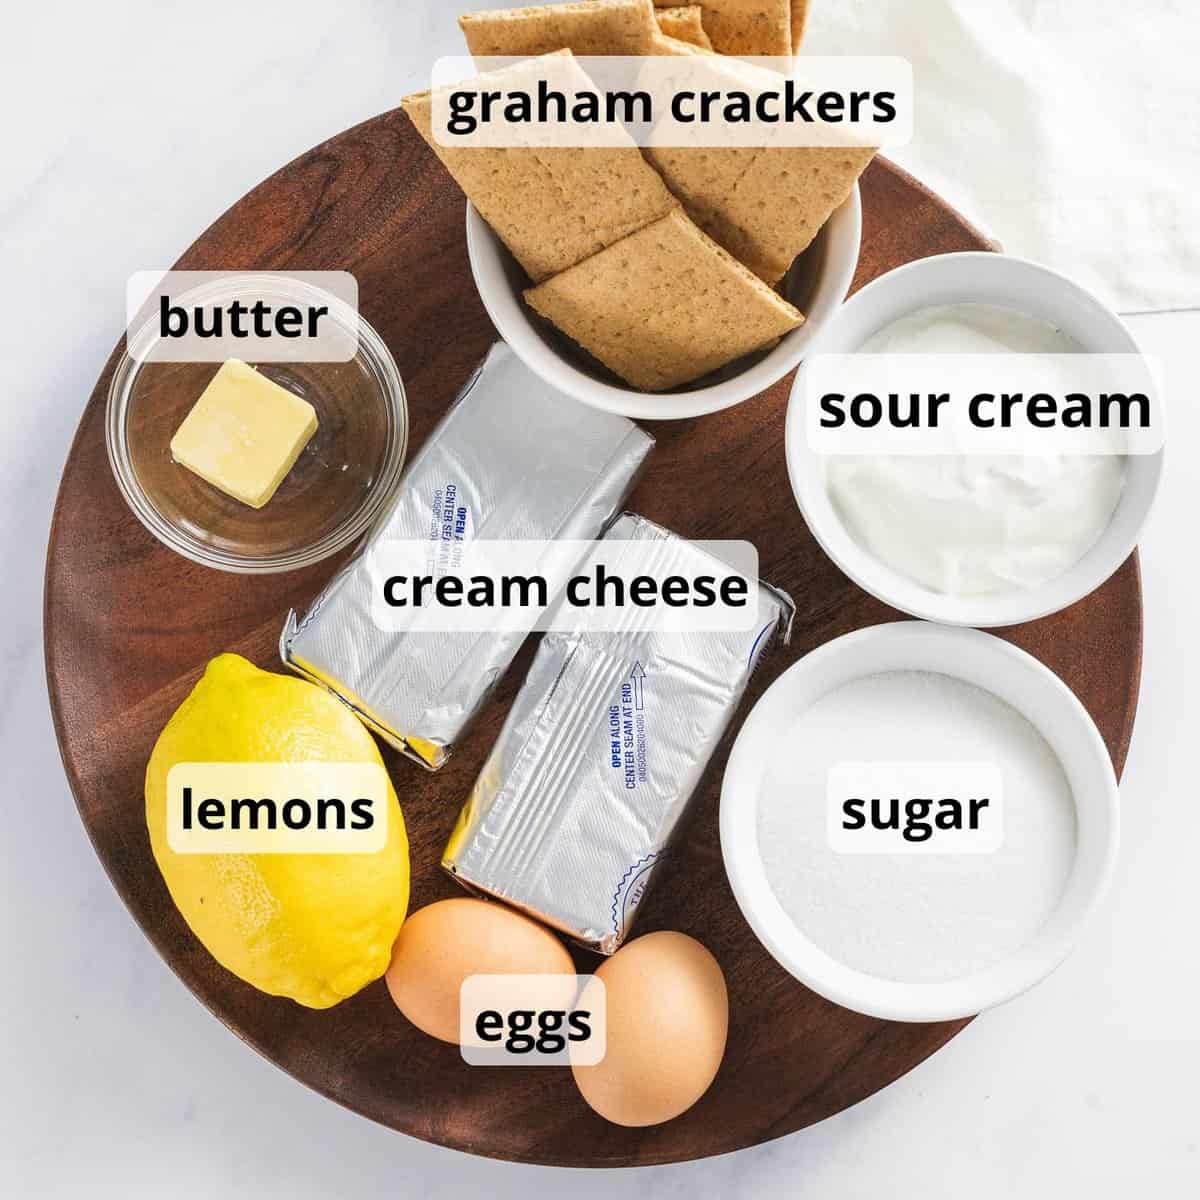 Ingredients for lemon cheesecake with text.